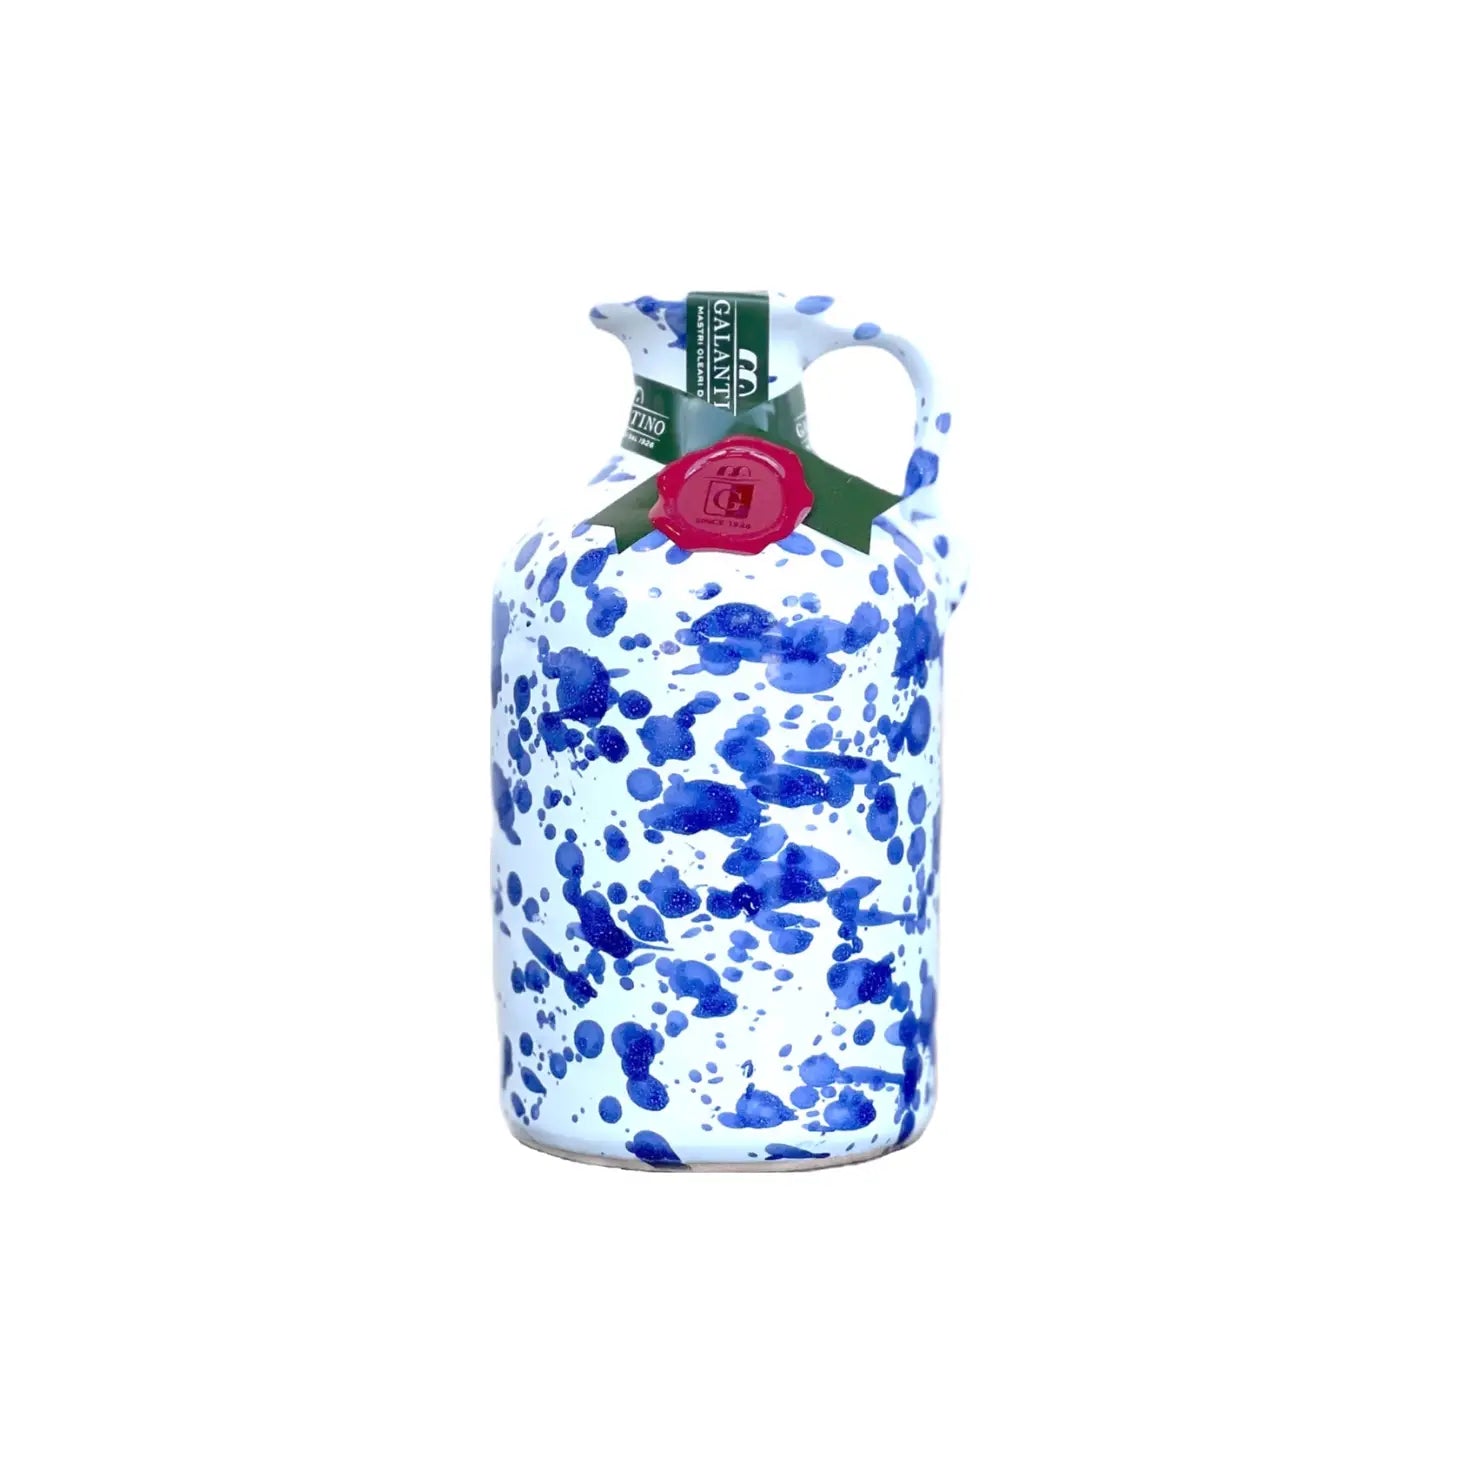 Hand-Painted Extra Virgin Olive Oil Ceramic 250ml - Cobalt or Green